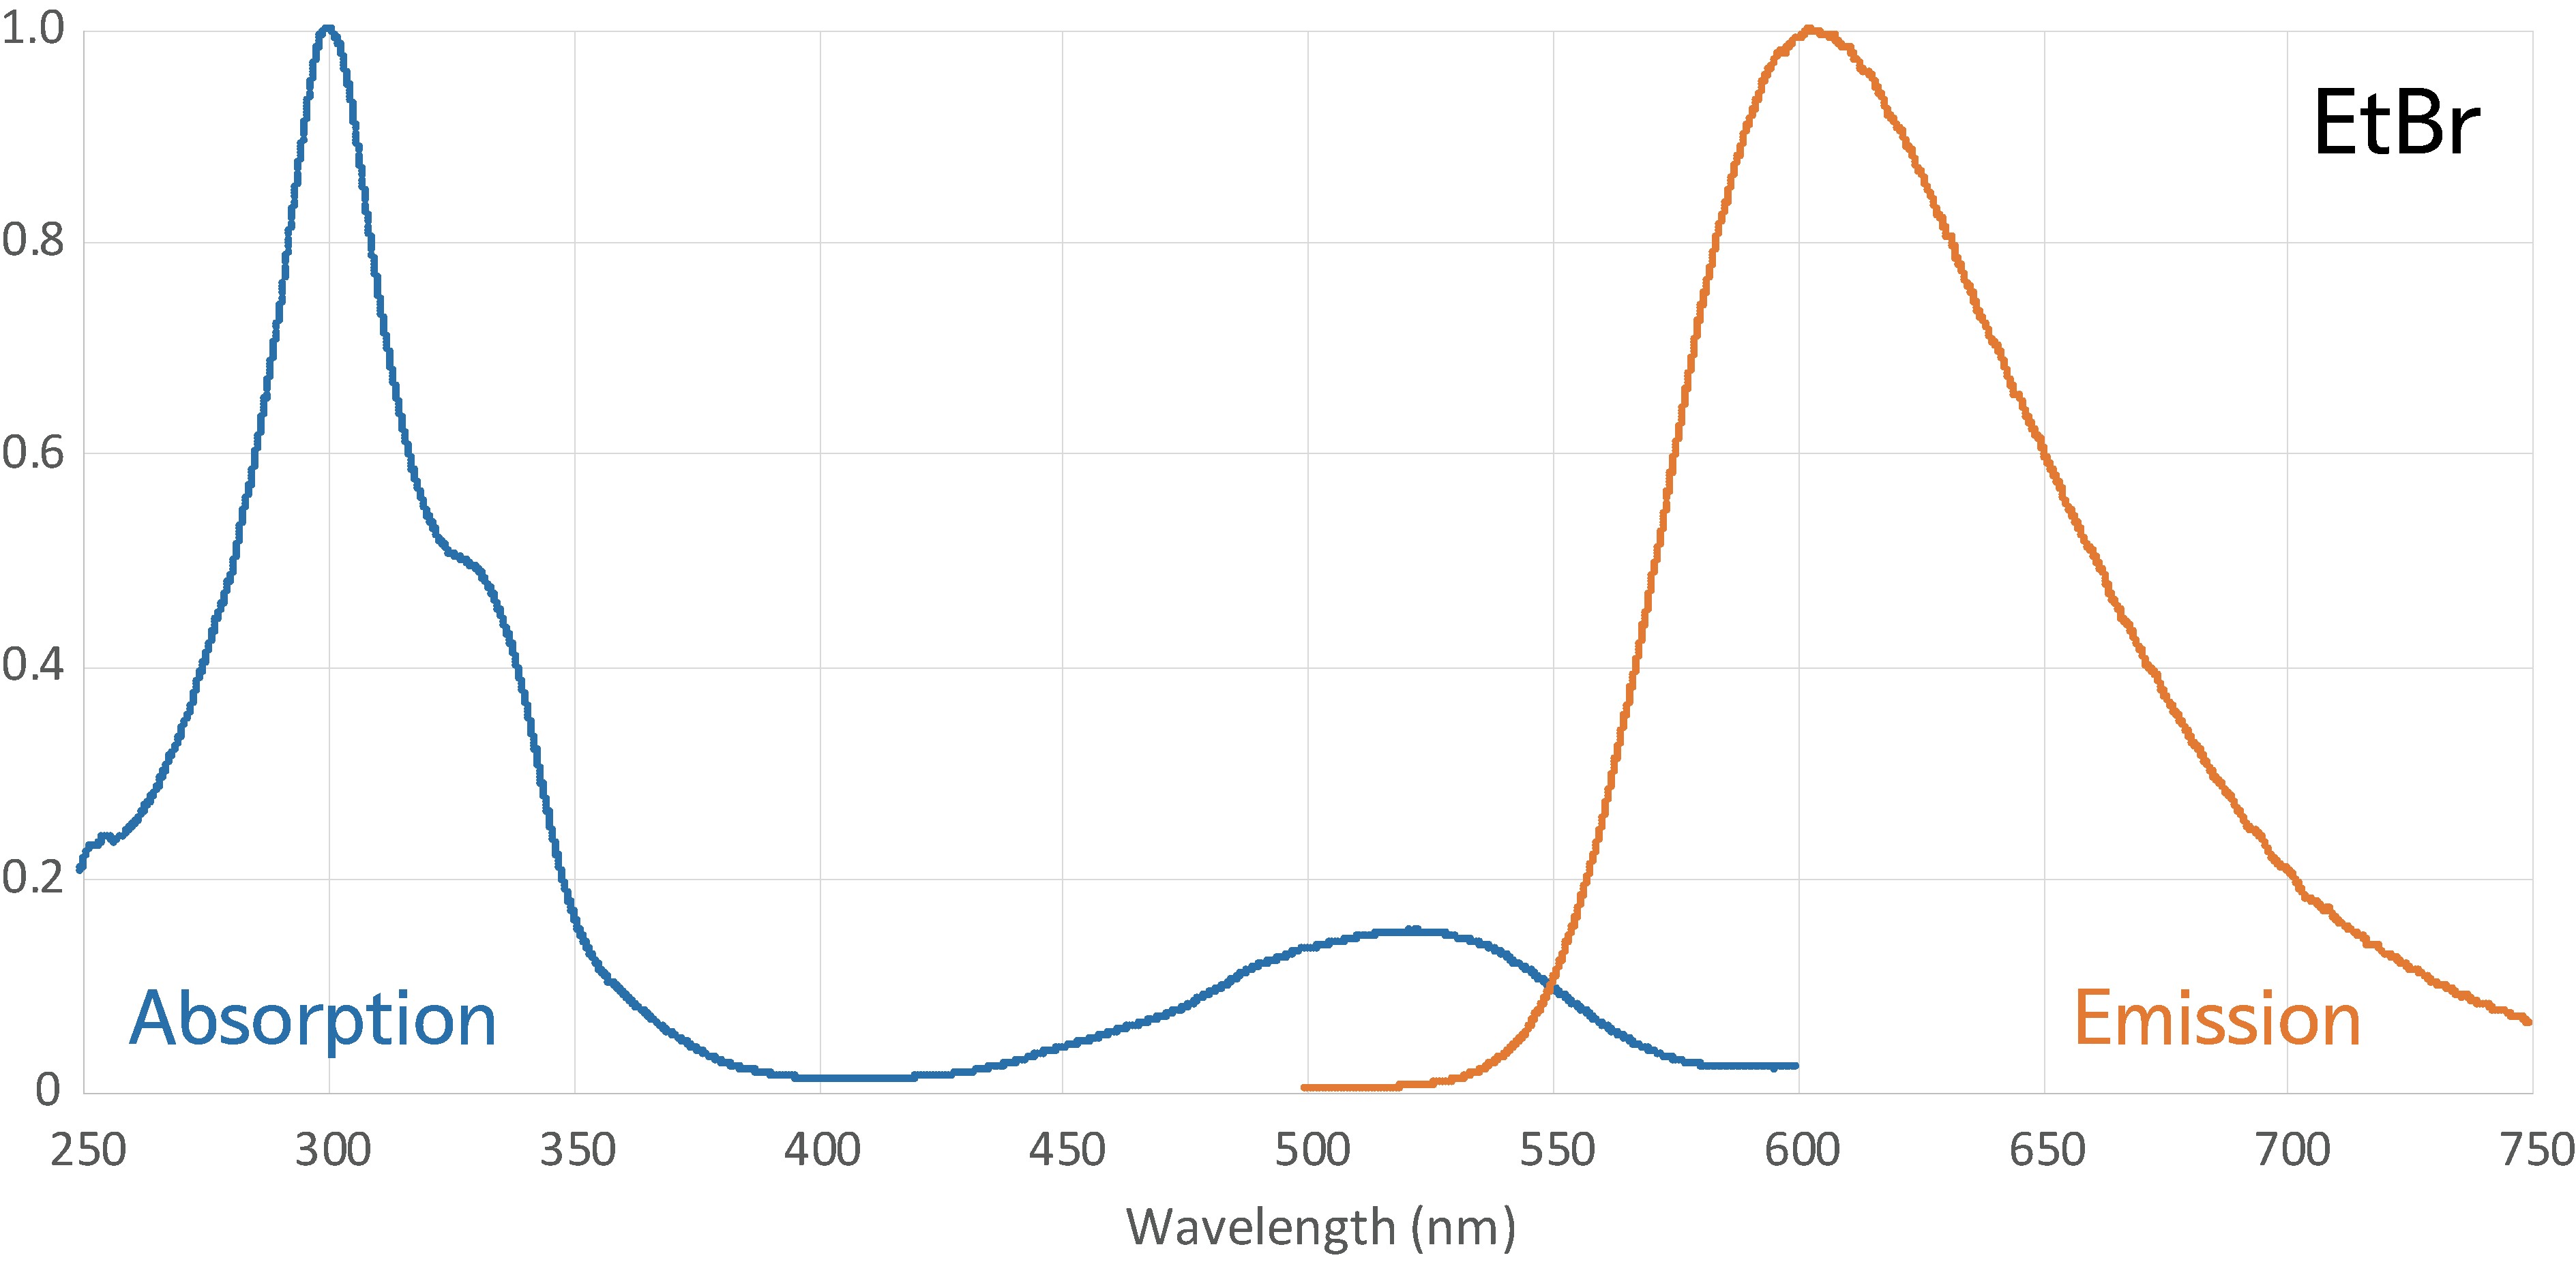 Absorption and Emission wavelength of EtBr